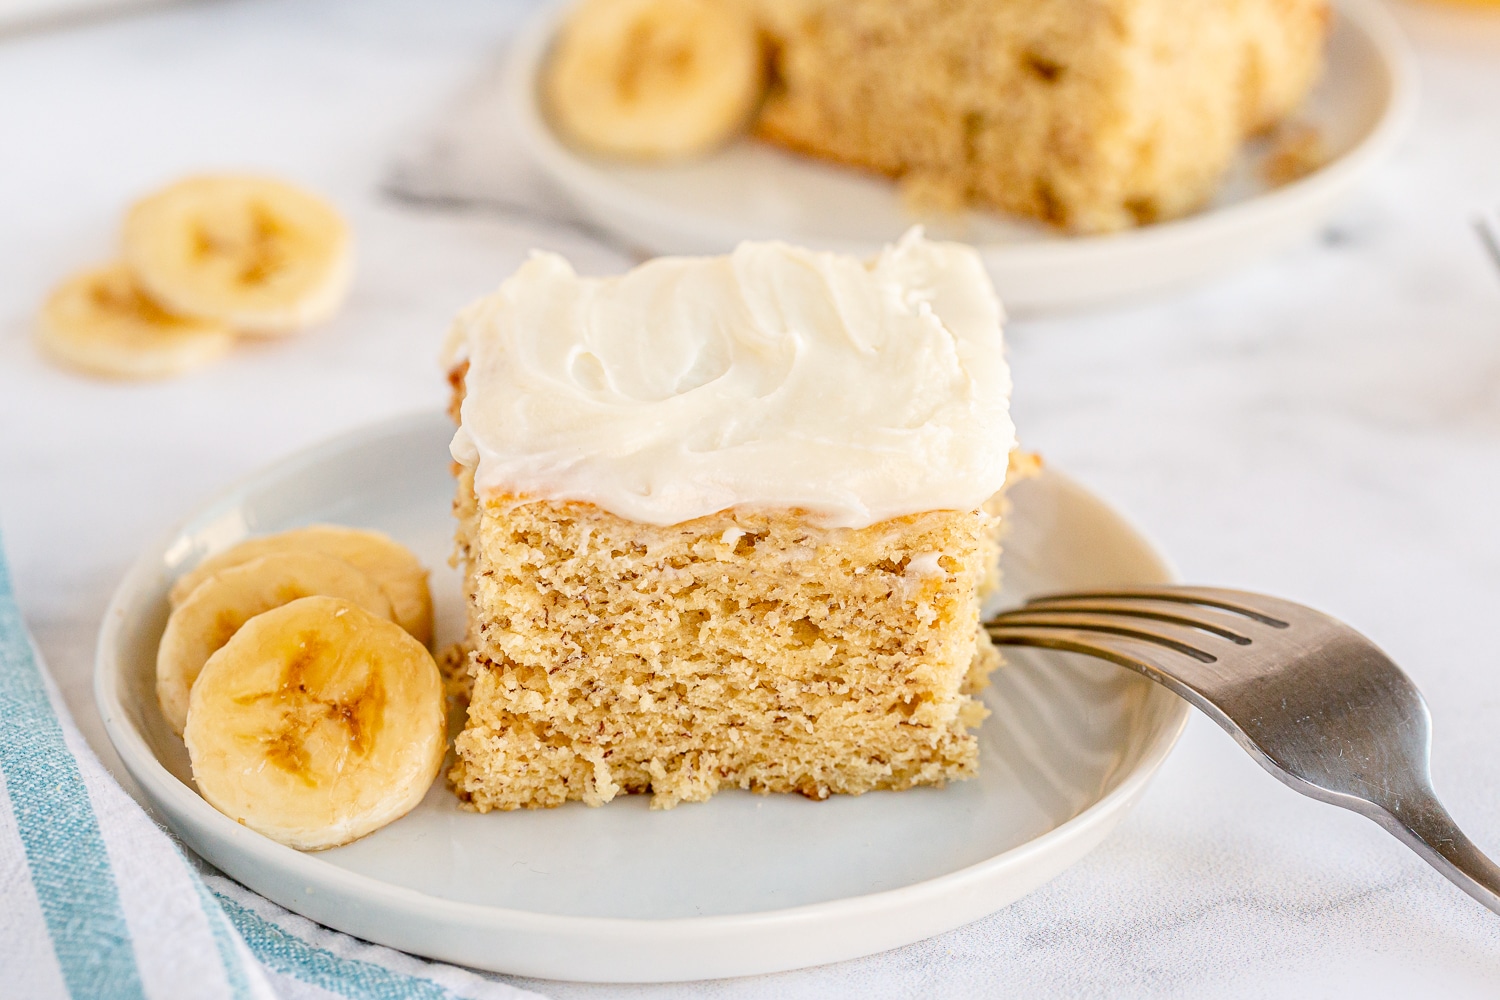 serving of banana cake on plate with banana slices